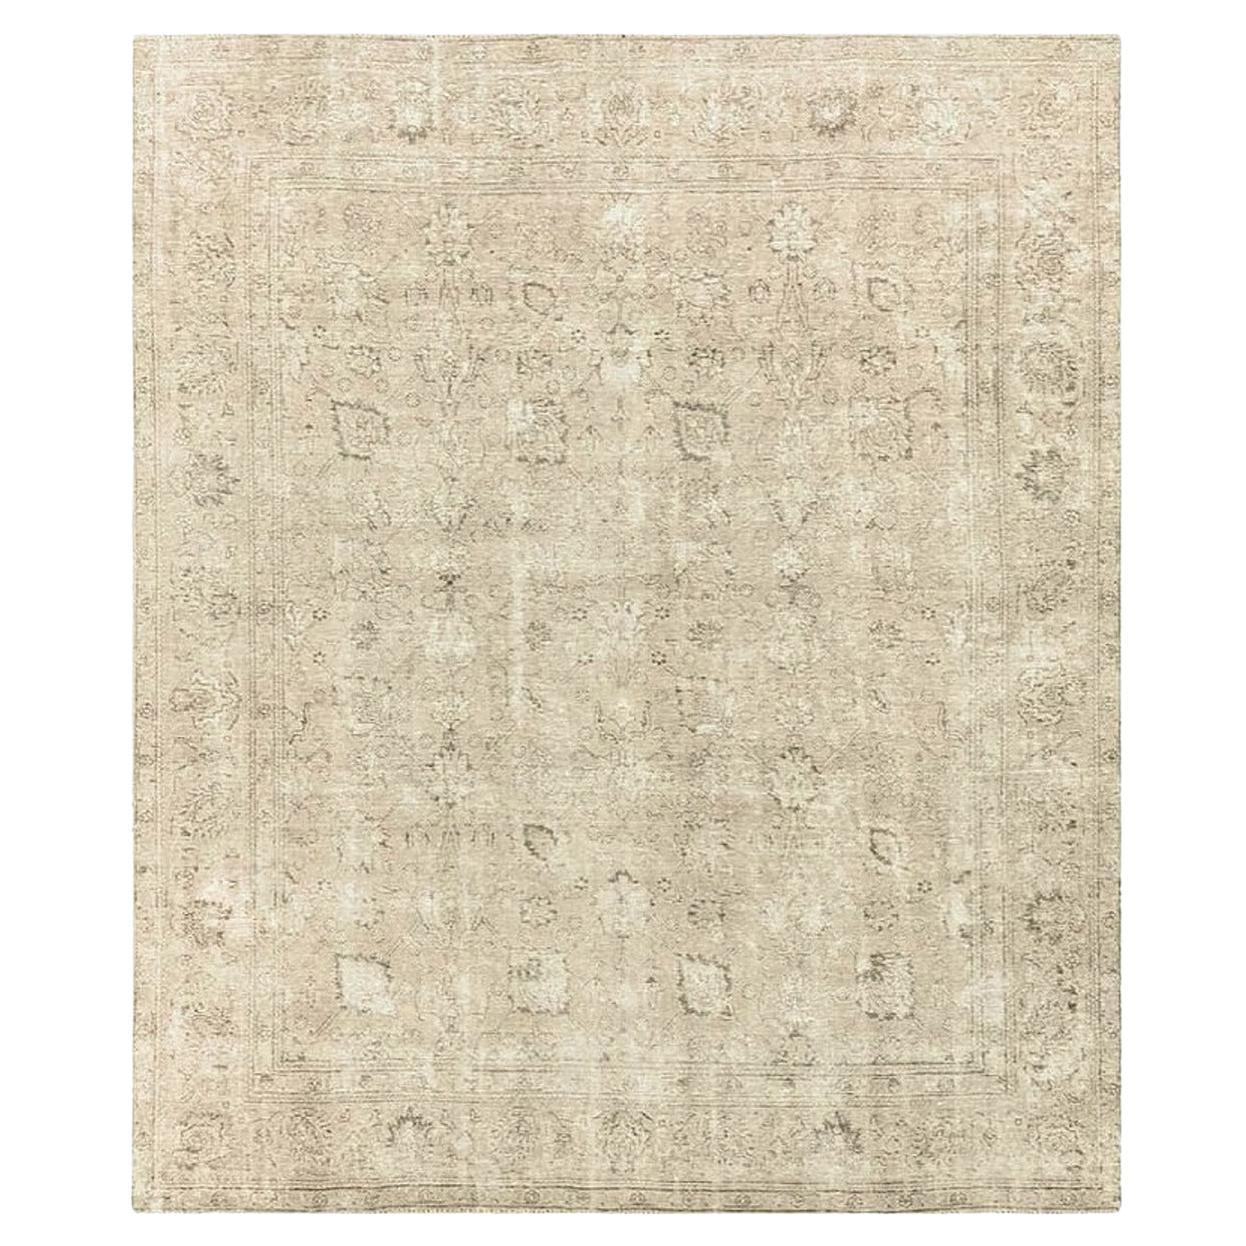 Vintage Muted Rug Classic Rug Gray Beige Brown Hand Knotted Neutral Tabriz For Sale